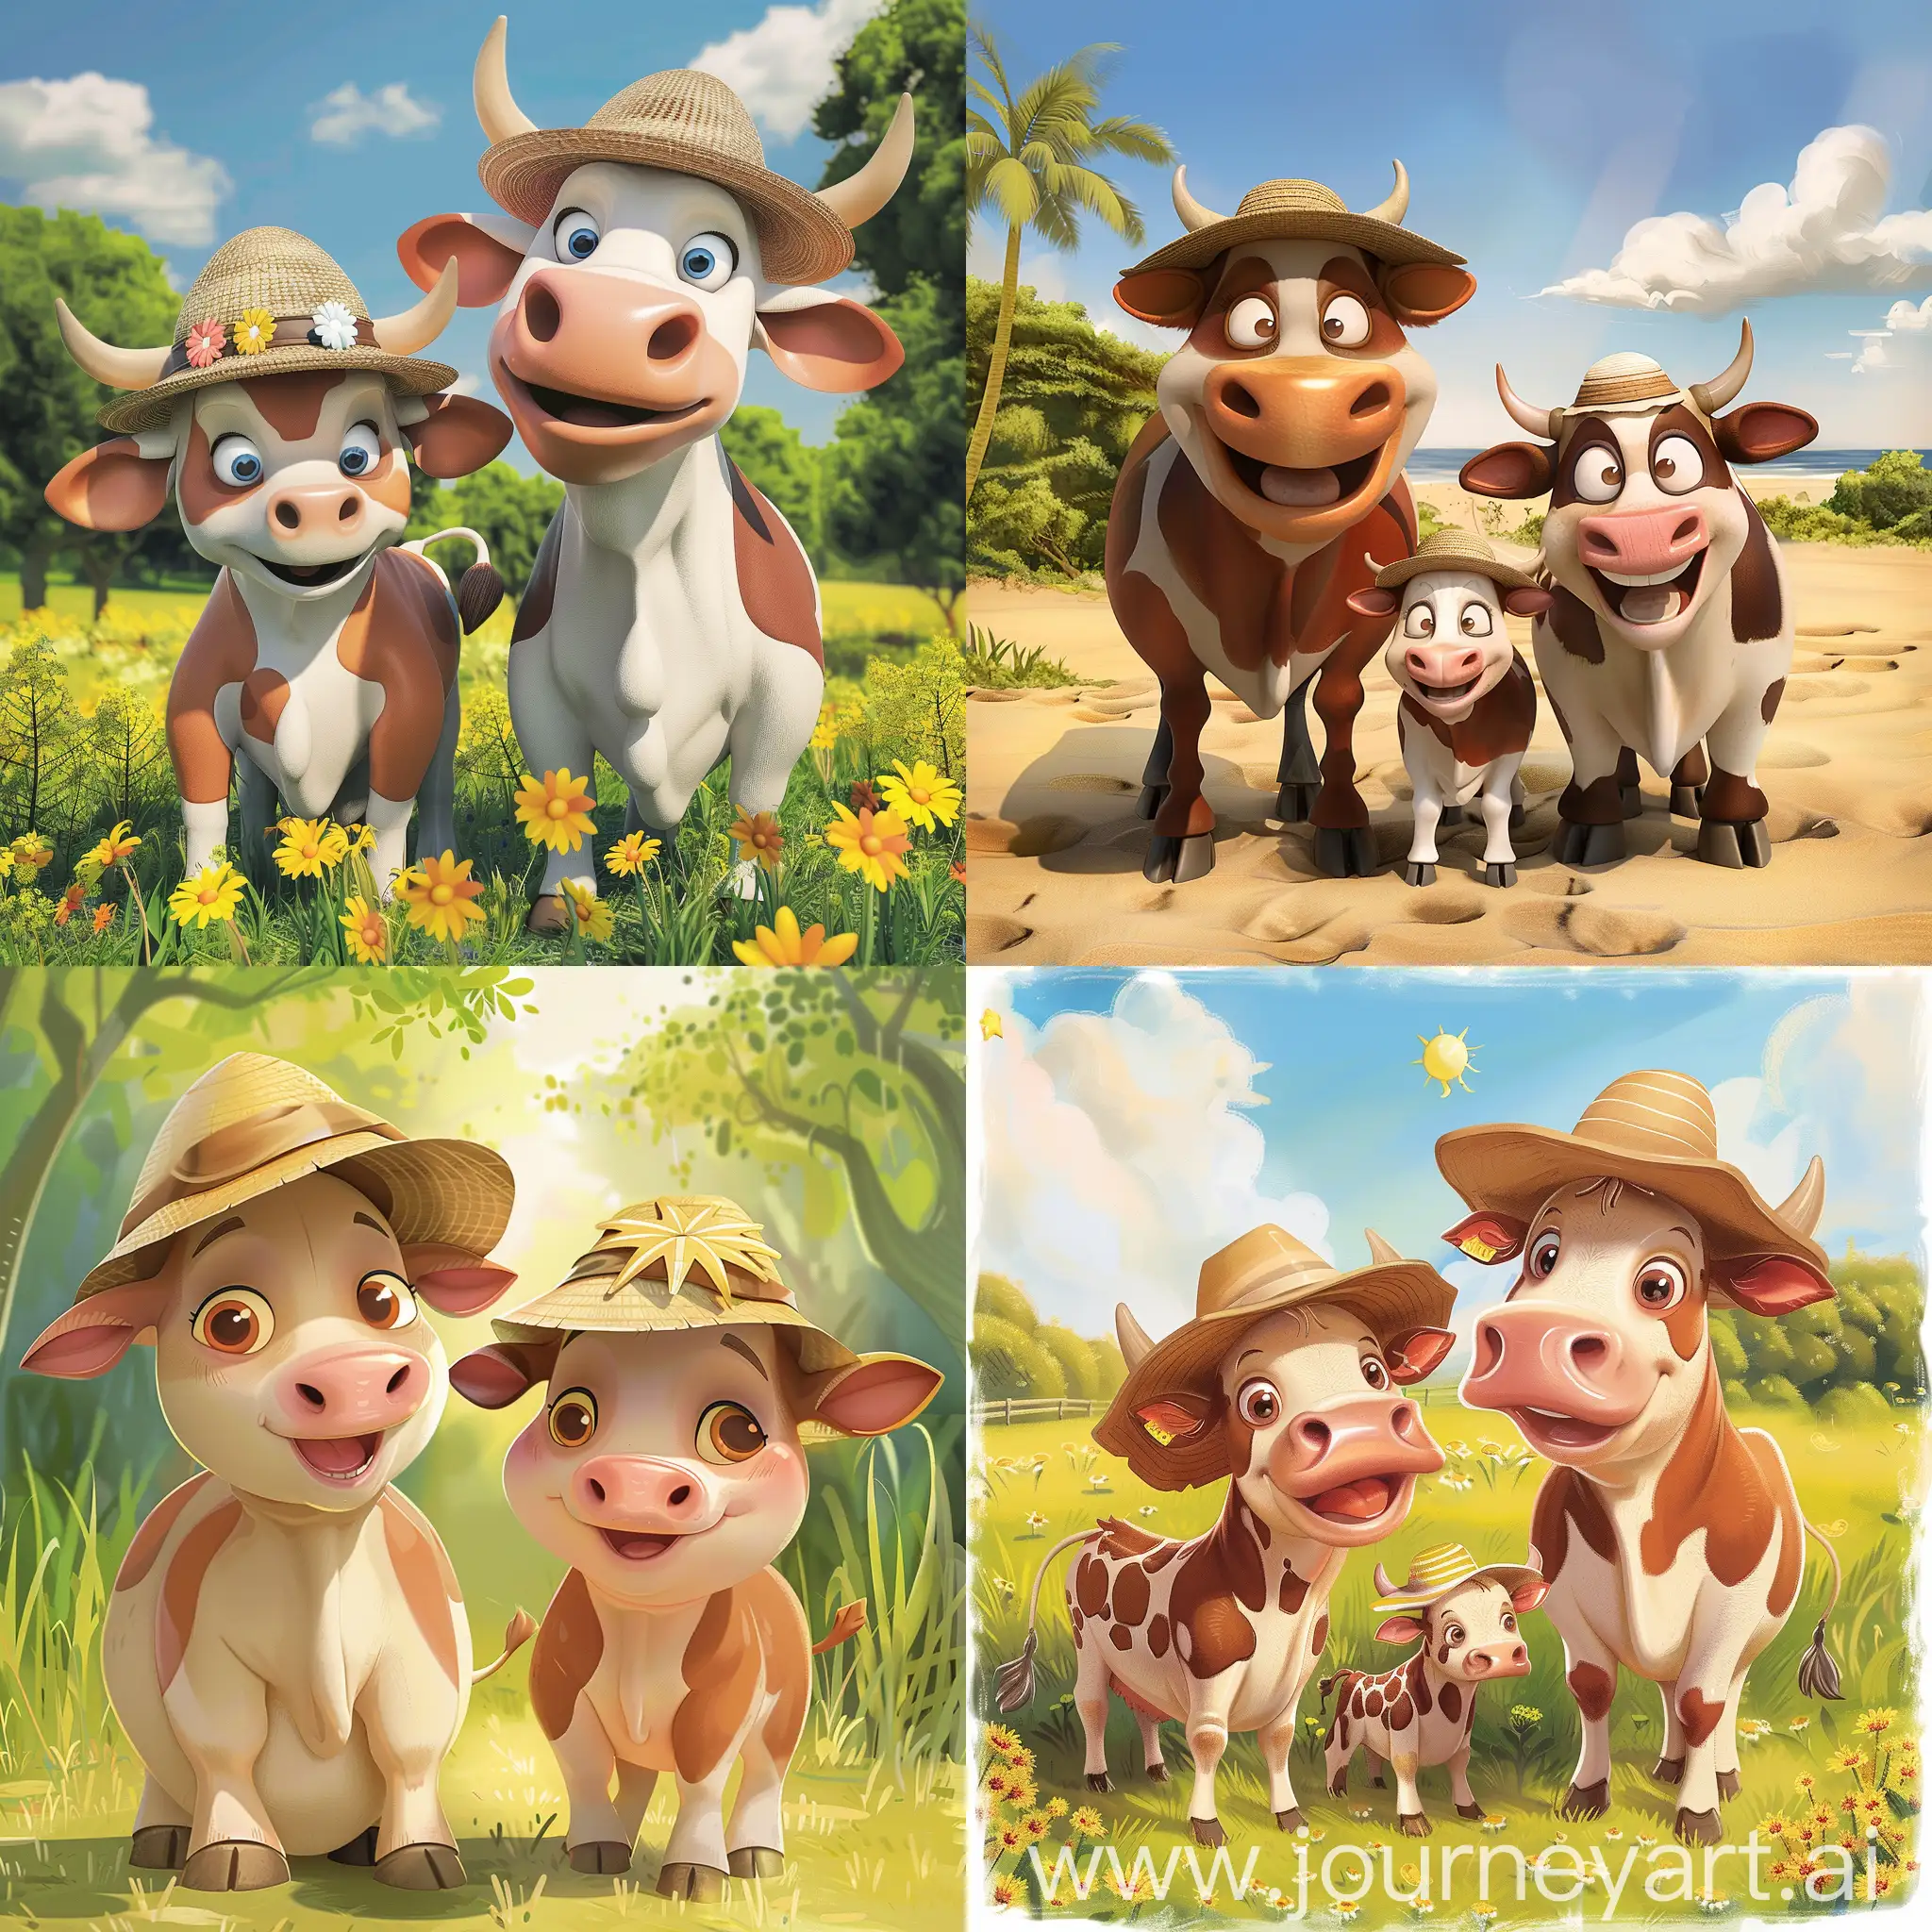 2 funny cows, a calf, sublimation, animated, with sunhats on